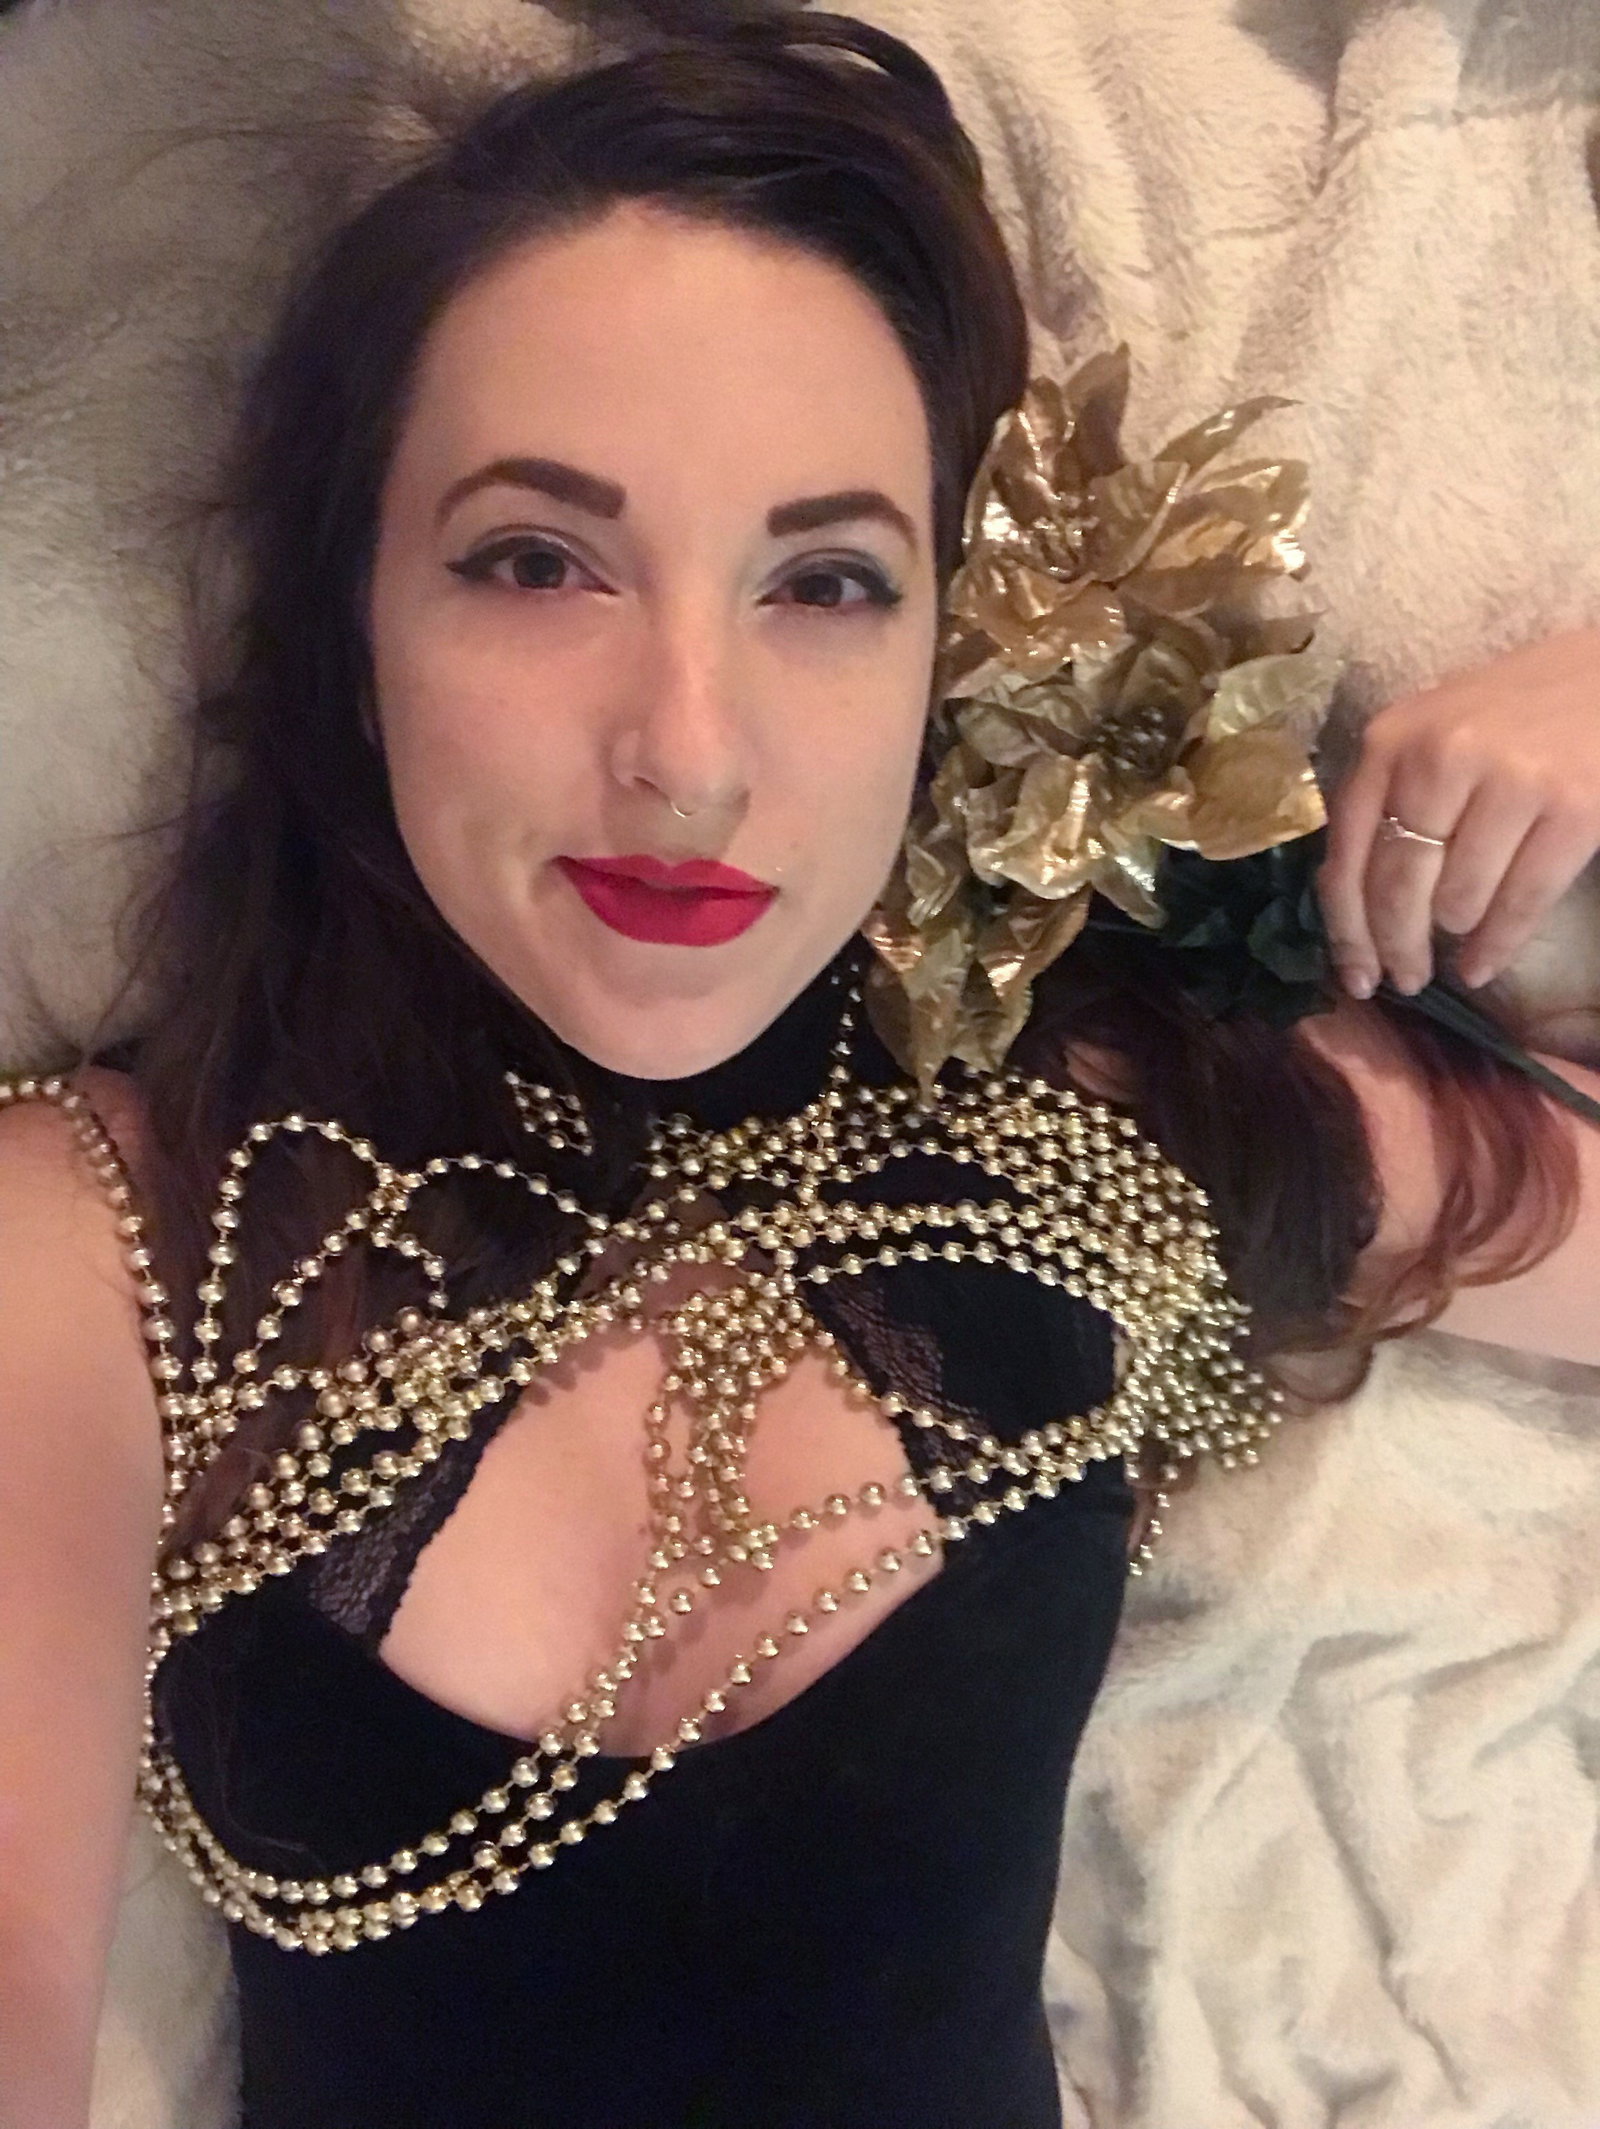 Watch the Photo by HomeGrownVideo with the username @HomeGrownVideo, who is a brand user, posted on December 20, 2019 and the text says 'www.homegrownvideo.com for all the beautiful, spirited girls this holiday season :) #christmas #holidays #holidaygirls #nakedgirls #christmasspirit #brunette #sexygirl'